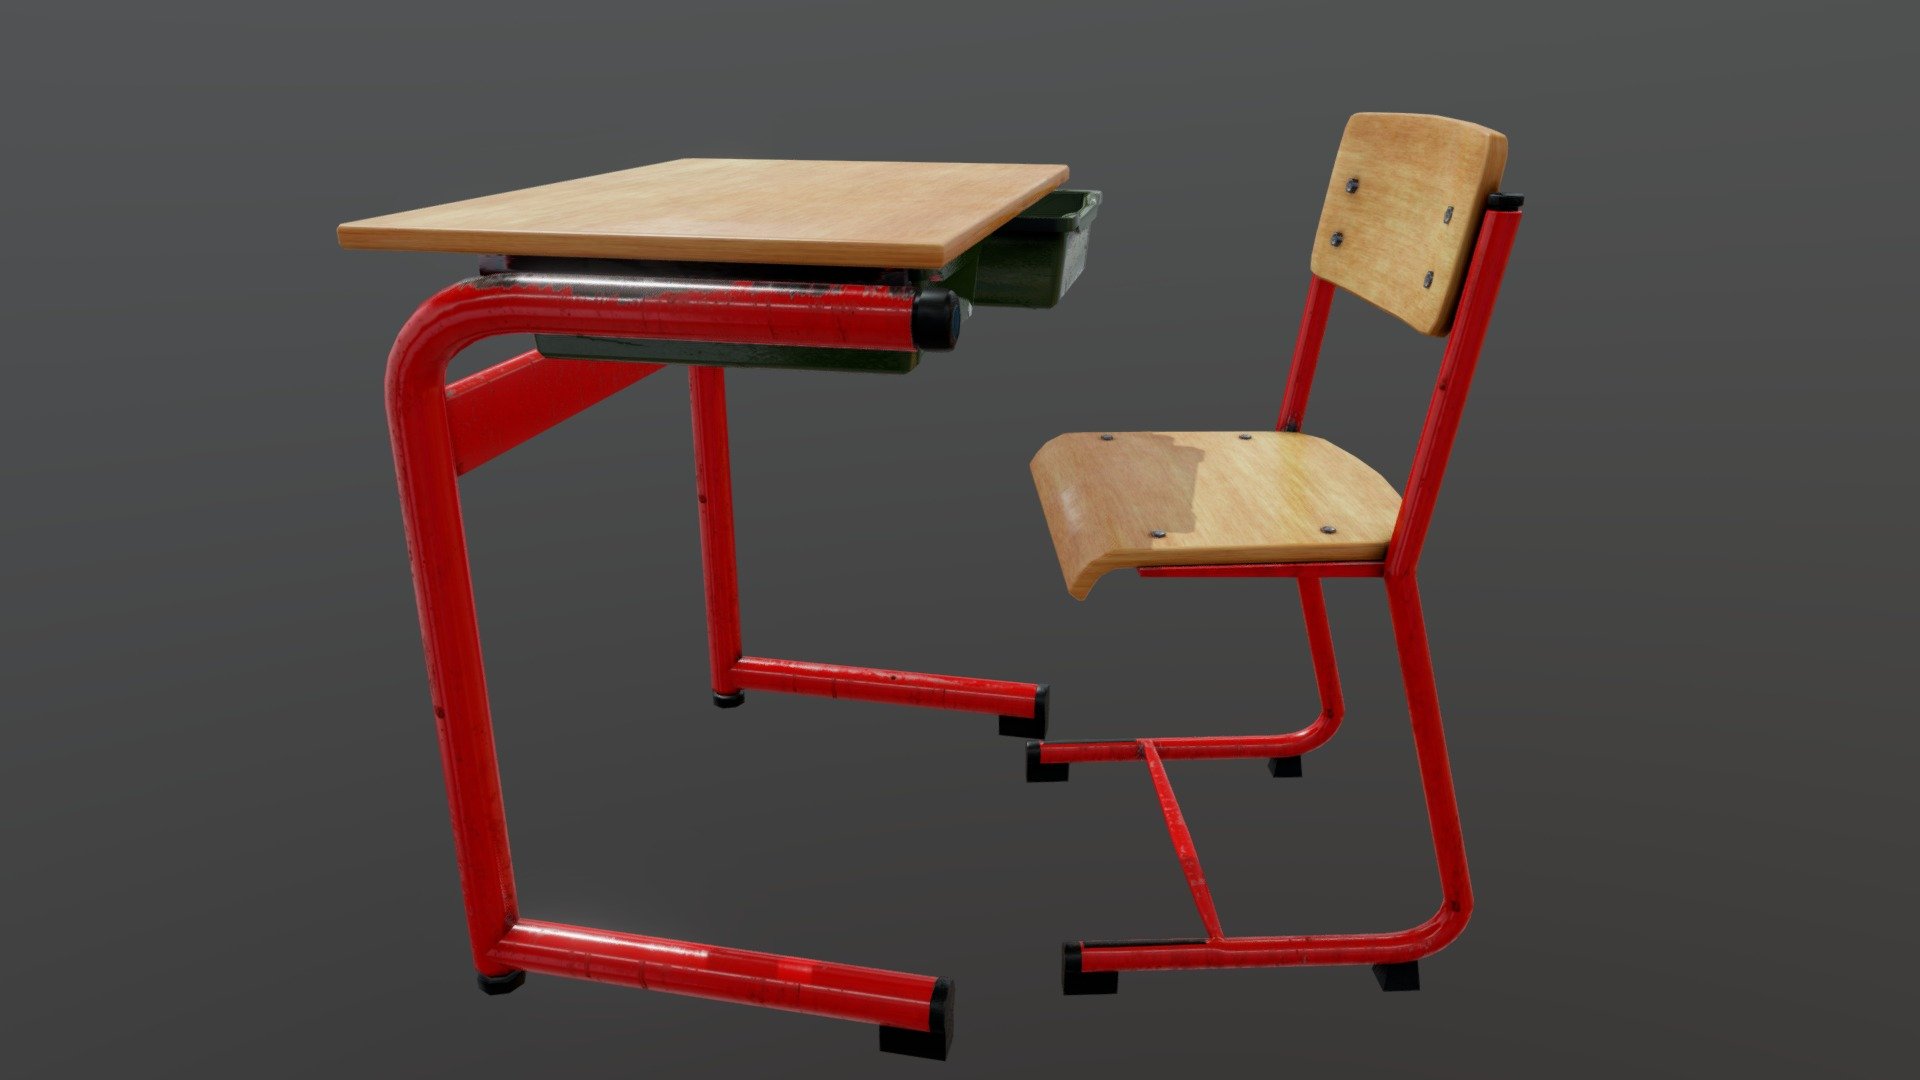 This school desk is the first prop I've created for our latest VR project with free speech recognition, that I worked on as art director / lead artist.
It is based on a 90's Dutch school desk, with modern dimensions.

Check out the whole evironment on my Artstation, here: https://www.artstation.com/artwork/oA0n2B

All envrionments must be able to run on an Oculus Go in combination with our IVA characters, speech recognition/processing and all other logic at a minimum 72fps.
For more info: https://thesimulationcrew.com/ - School Desk - 3D model by JamieNooten 3d model